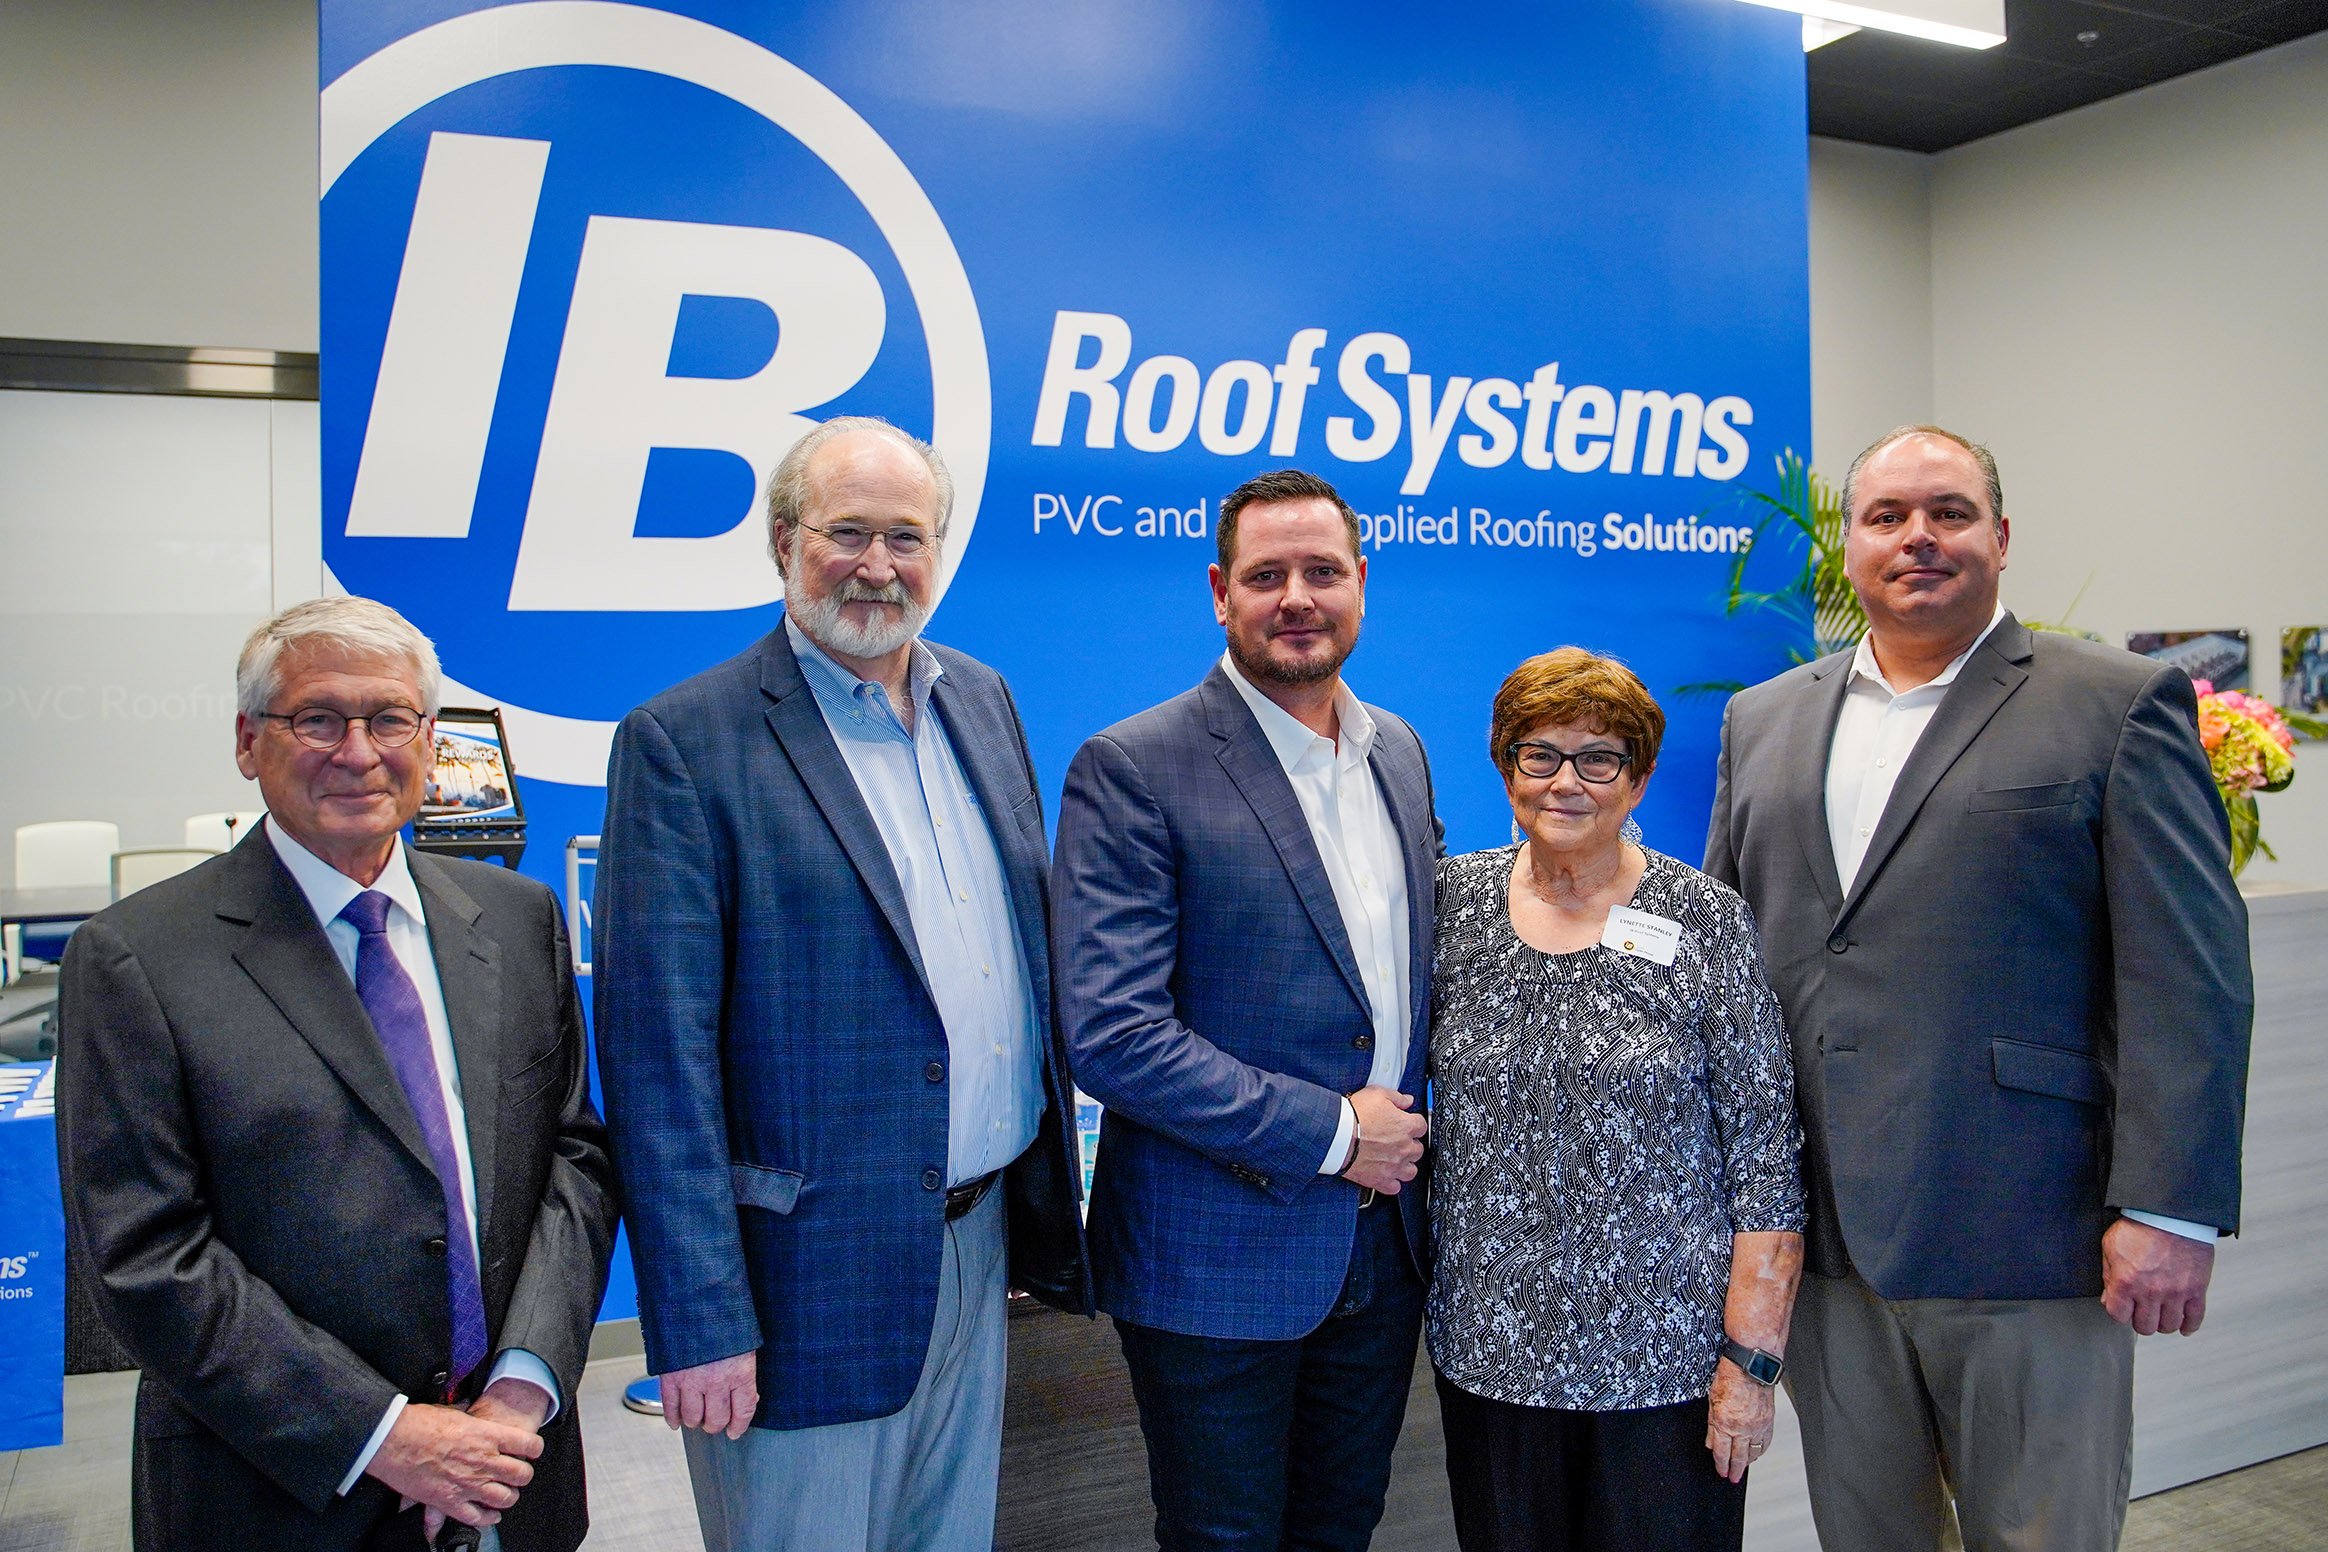 IB Roof Systems relocates headquarters to Grapevine, Texas increasing fulfillment capacity of distribution center.